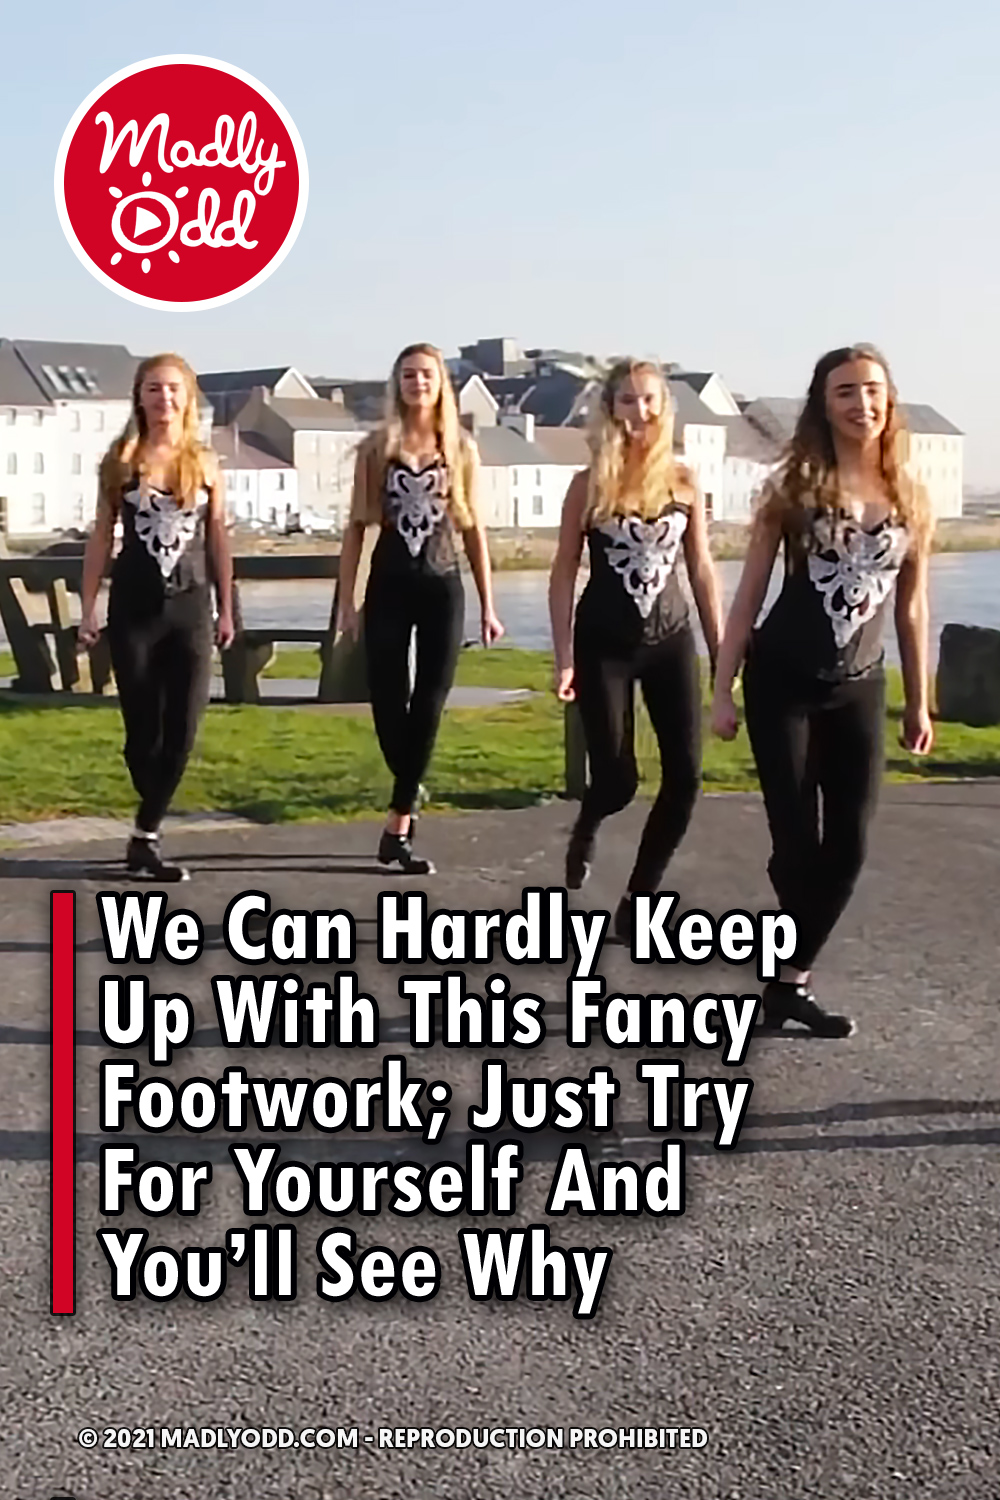 We Can Hardly Keep Up With This Fancy Footwork; Just Try For Yourself And You’ll See Why